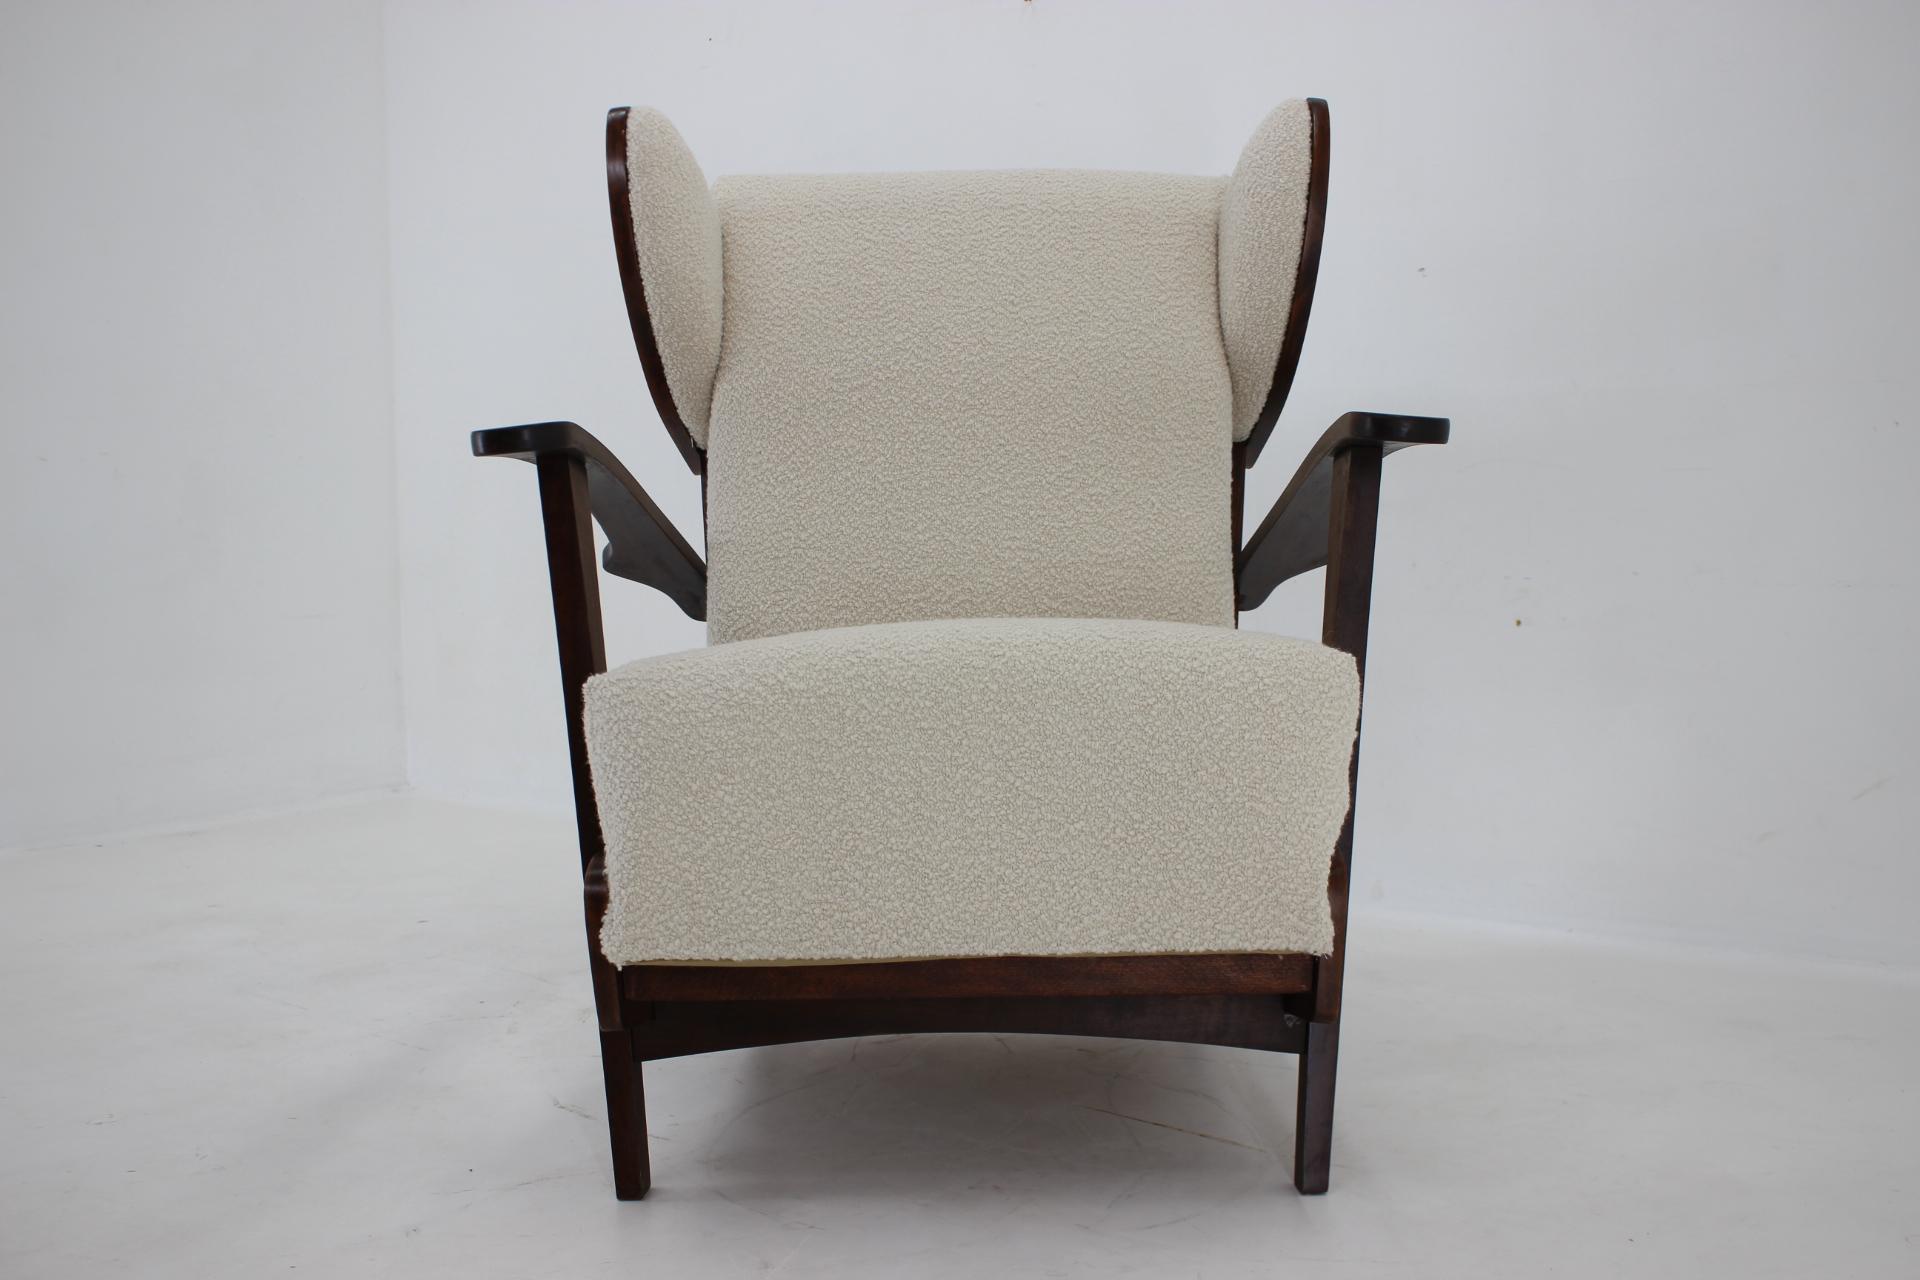 1940s Unique Large Wing Chair in Wool Boucle, Restored For Sale 3